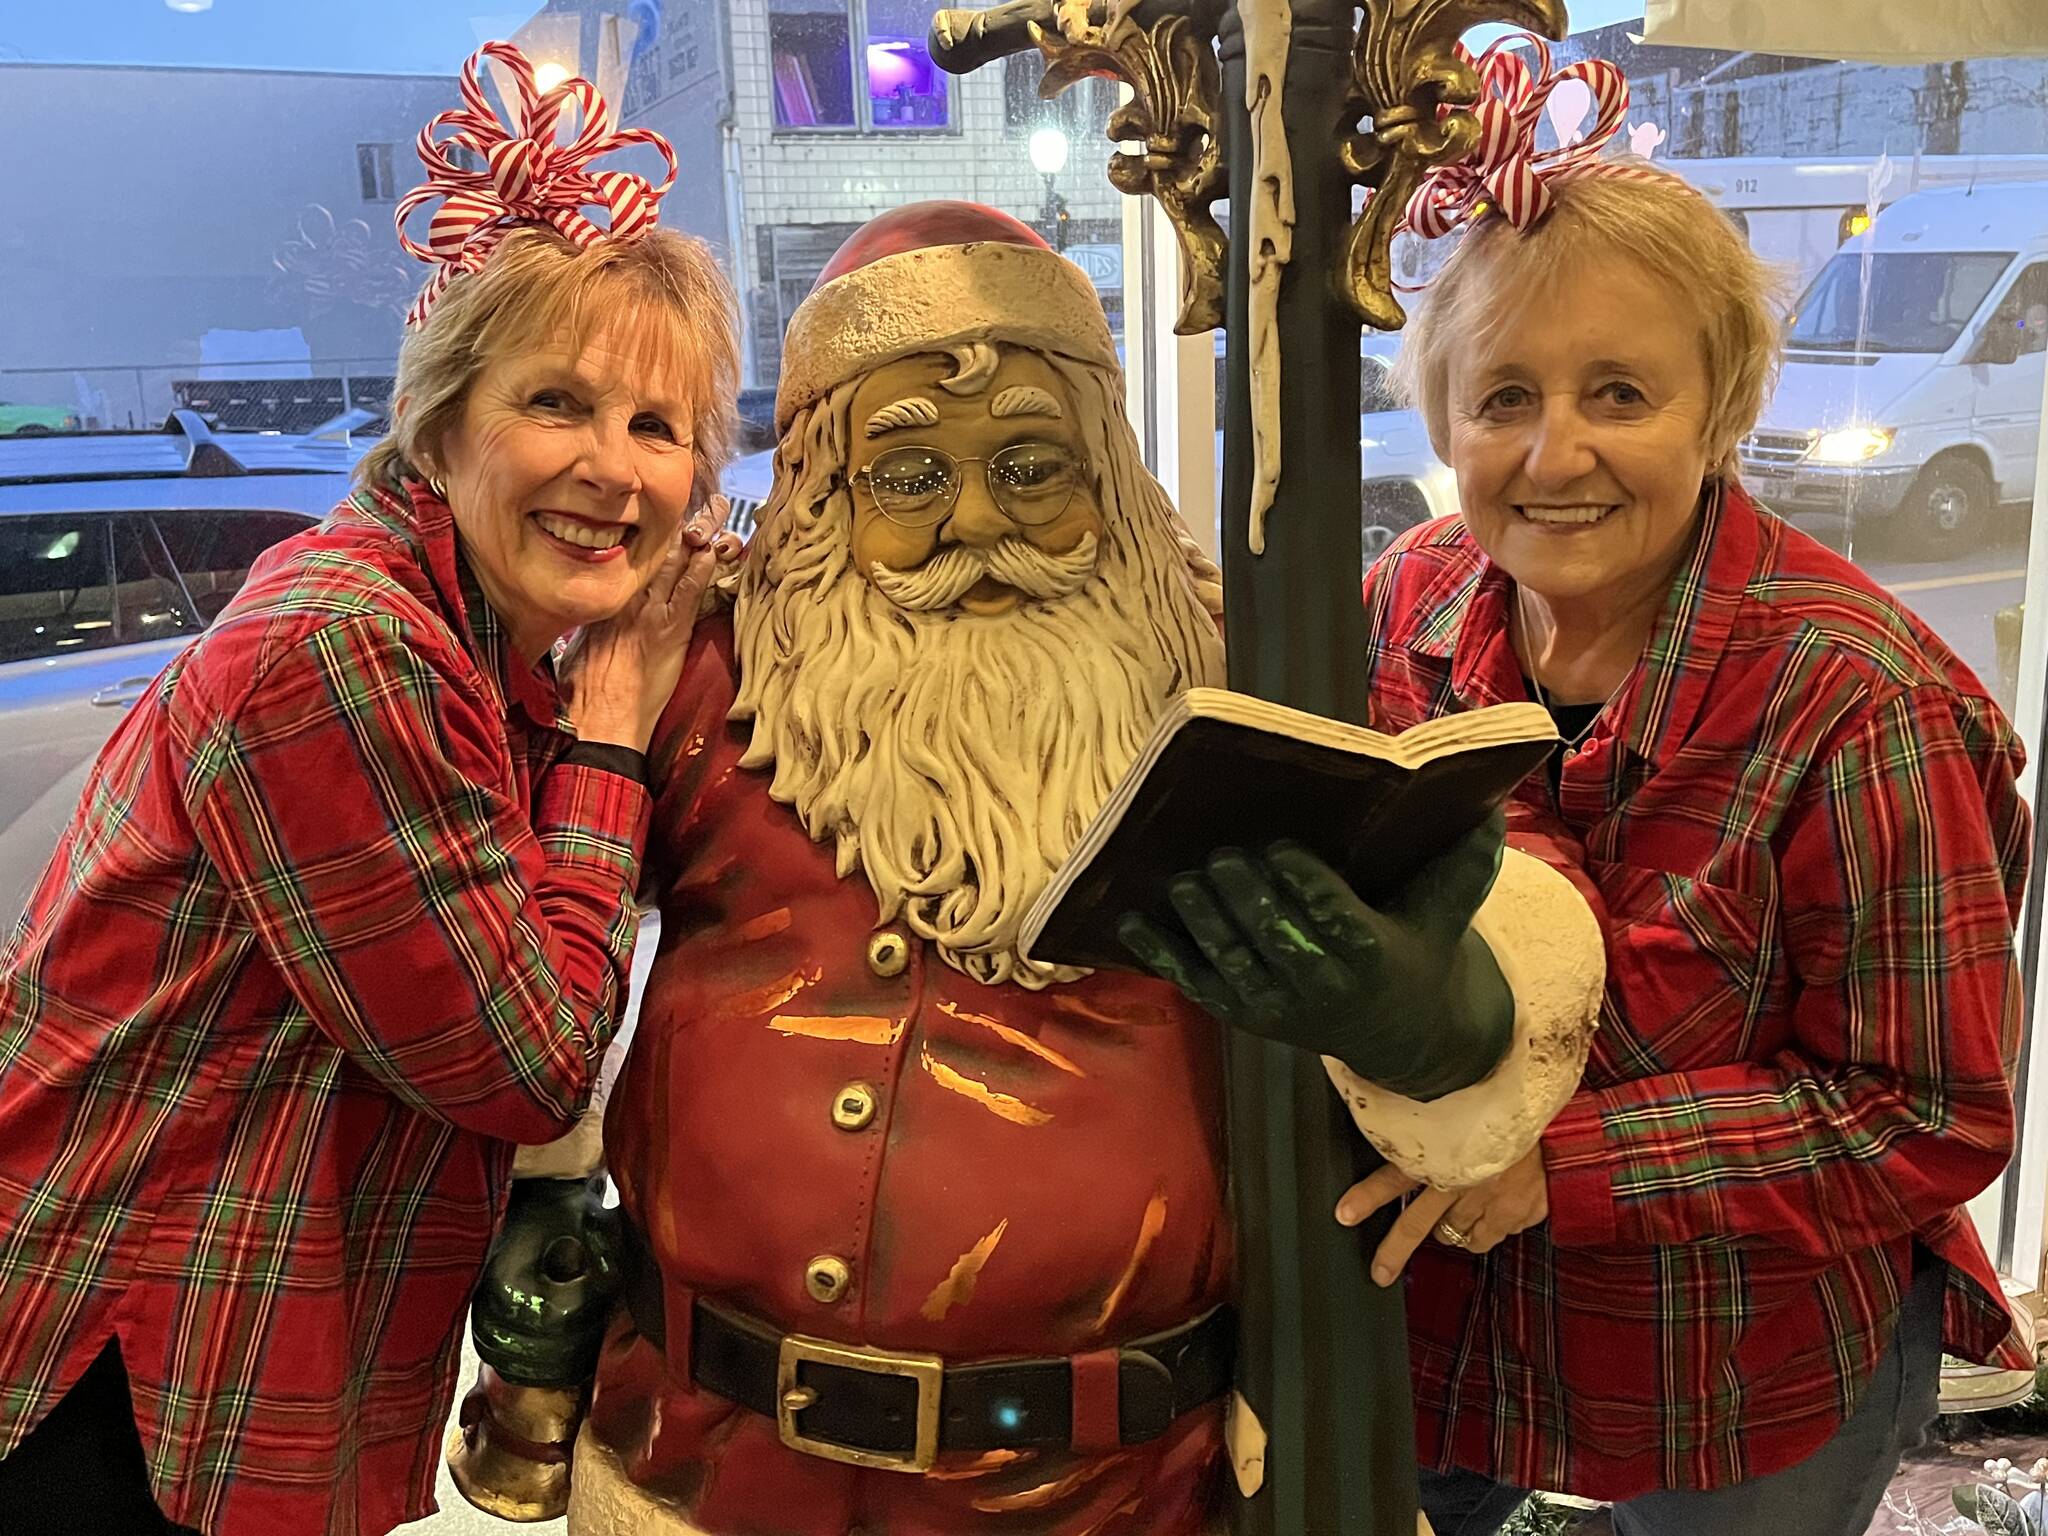 Matthew N. Wells / The Daily World
Santa checks his list as Downtown Aberdeen Association’s Bette Worth, left, and Bobbi McCracken pose next to the jolly, old elf. Soon, the real St. Nick will appear at Messy Jessy’s Bar and Grill — 212 S. I St., for a pancake breakfast starting at 9 a.m. Saturday to kick off Winterfest.